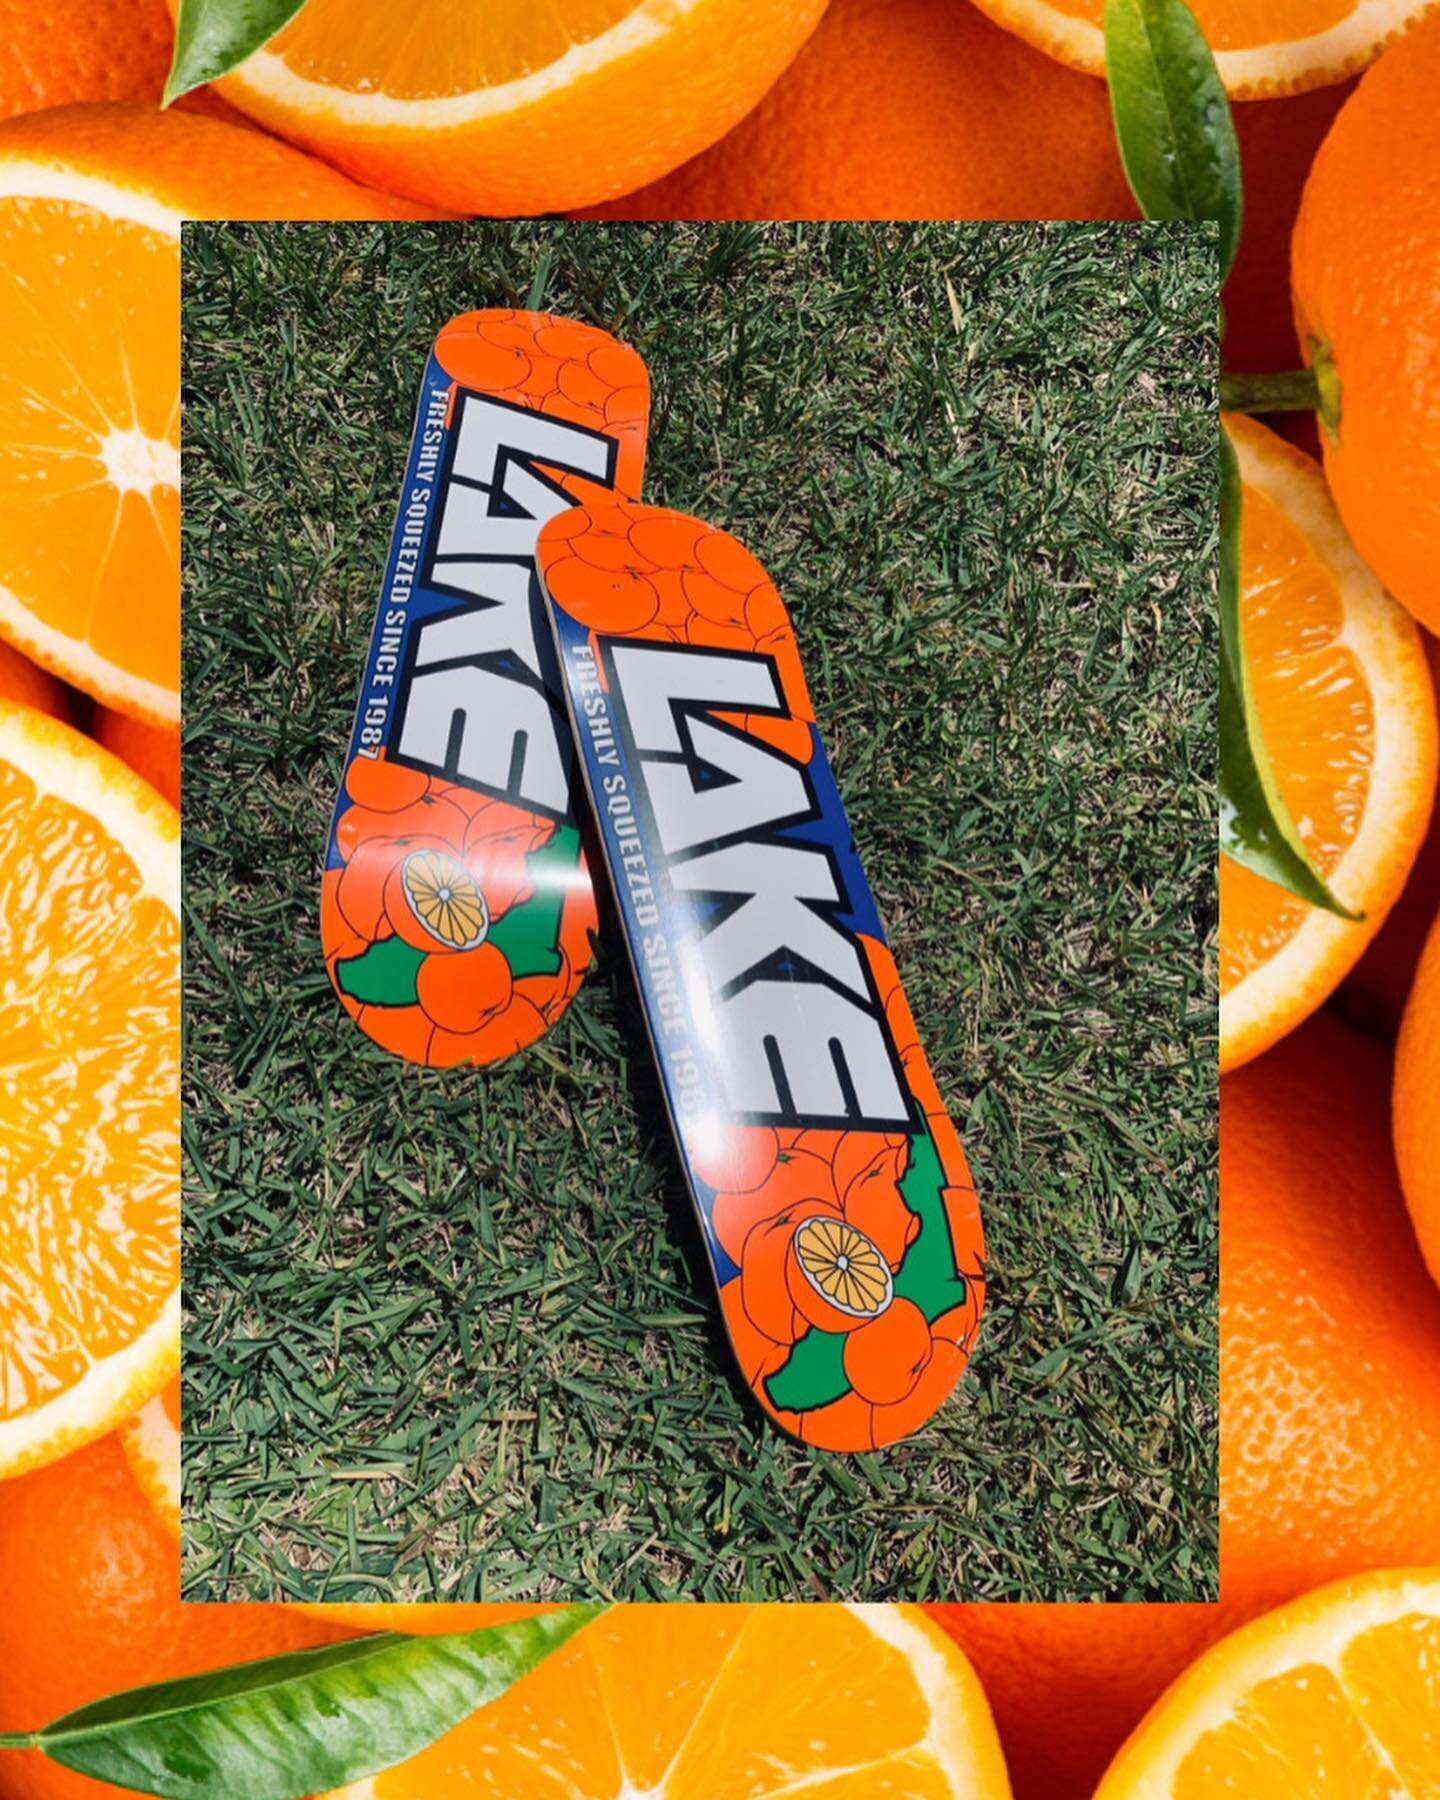 FRESHLY SQUEEZED NOW AVAILABLE IN 8.5 at lakeskateboards.com ! Dave Bamdas  @theboneless1 with a boosted one for your feed! 🔥🍊🔥